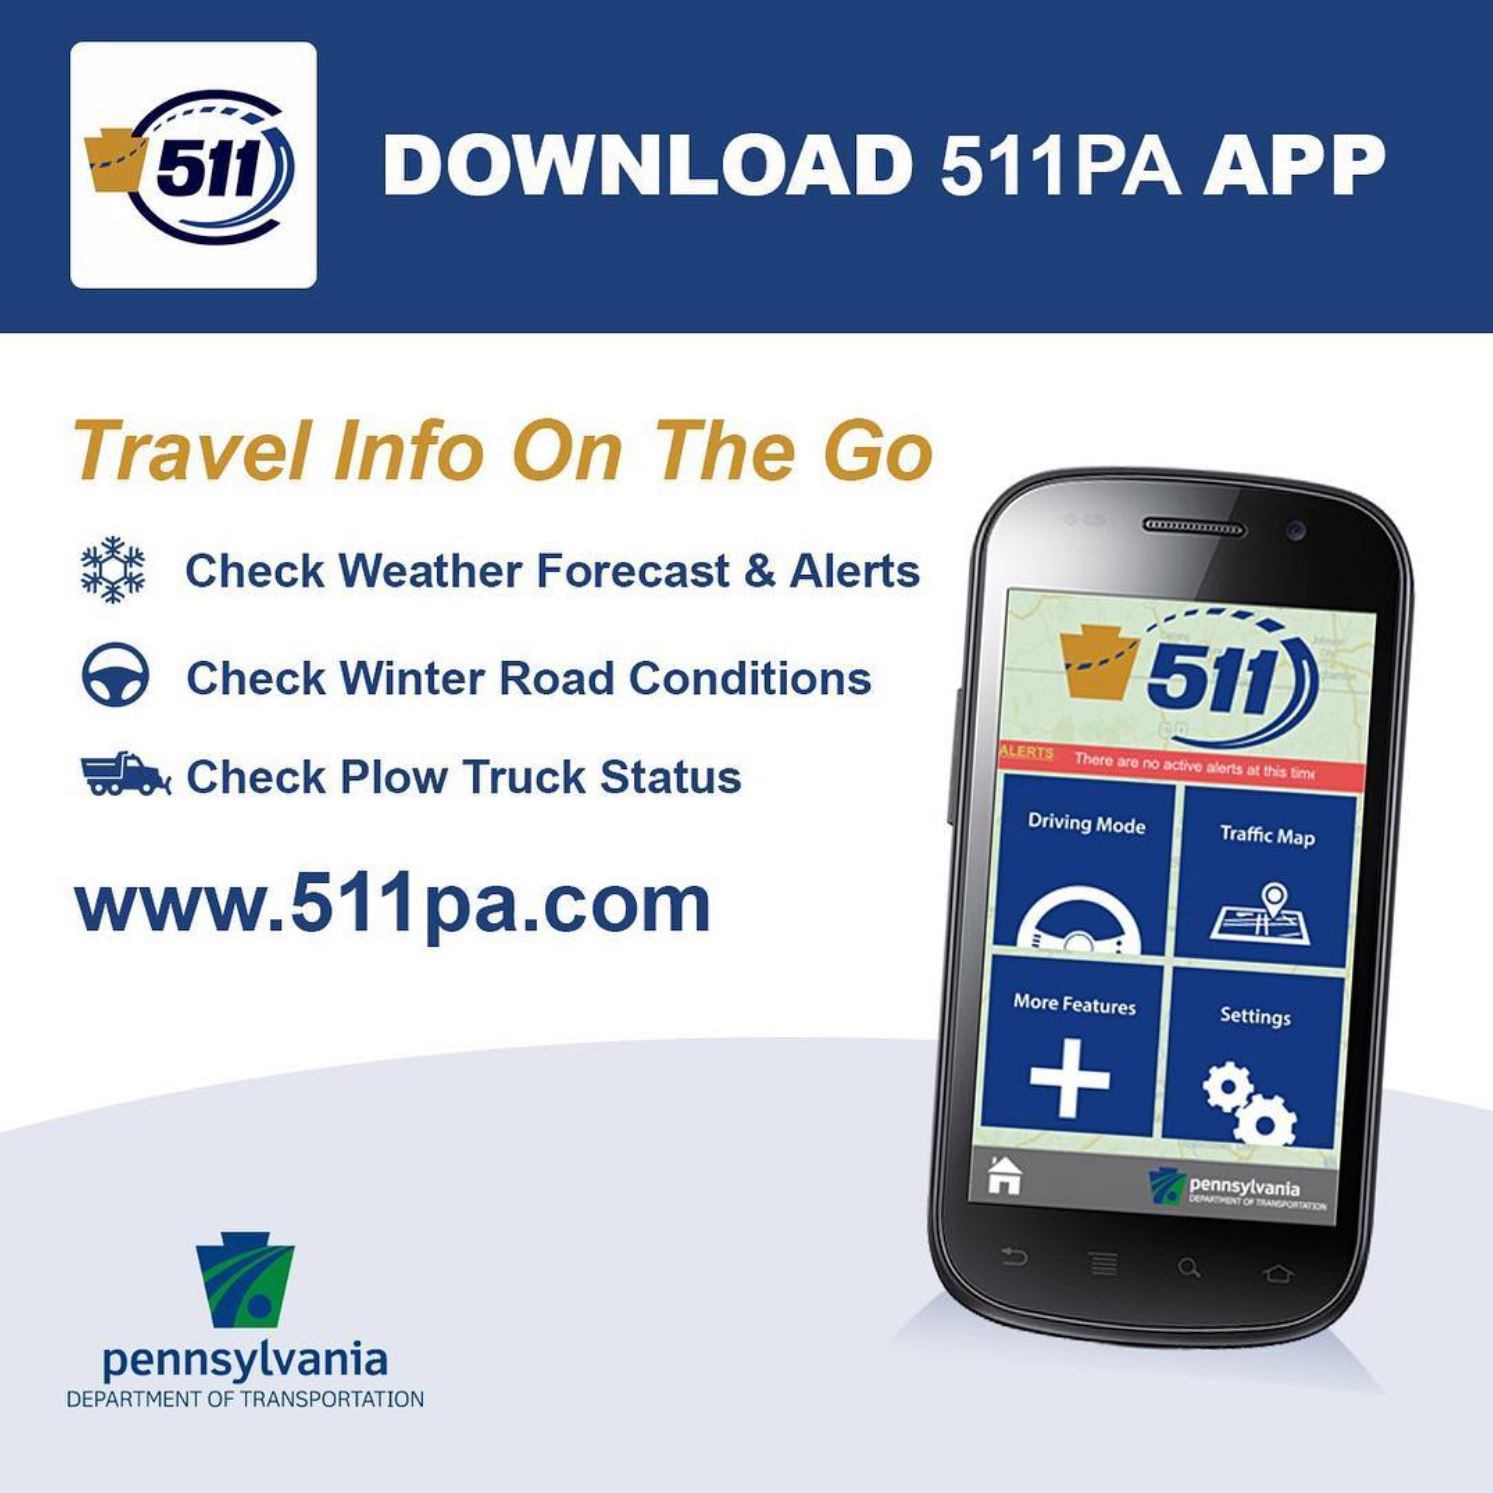 download 511pa app for winter info